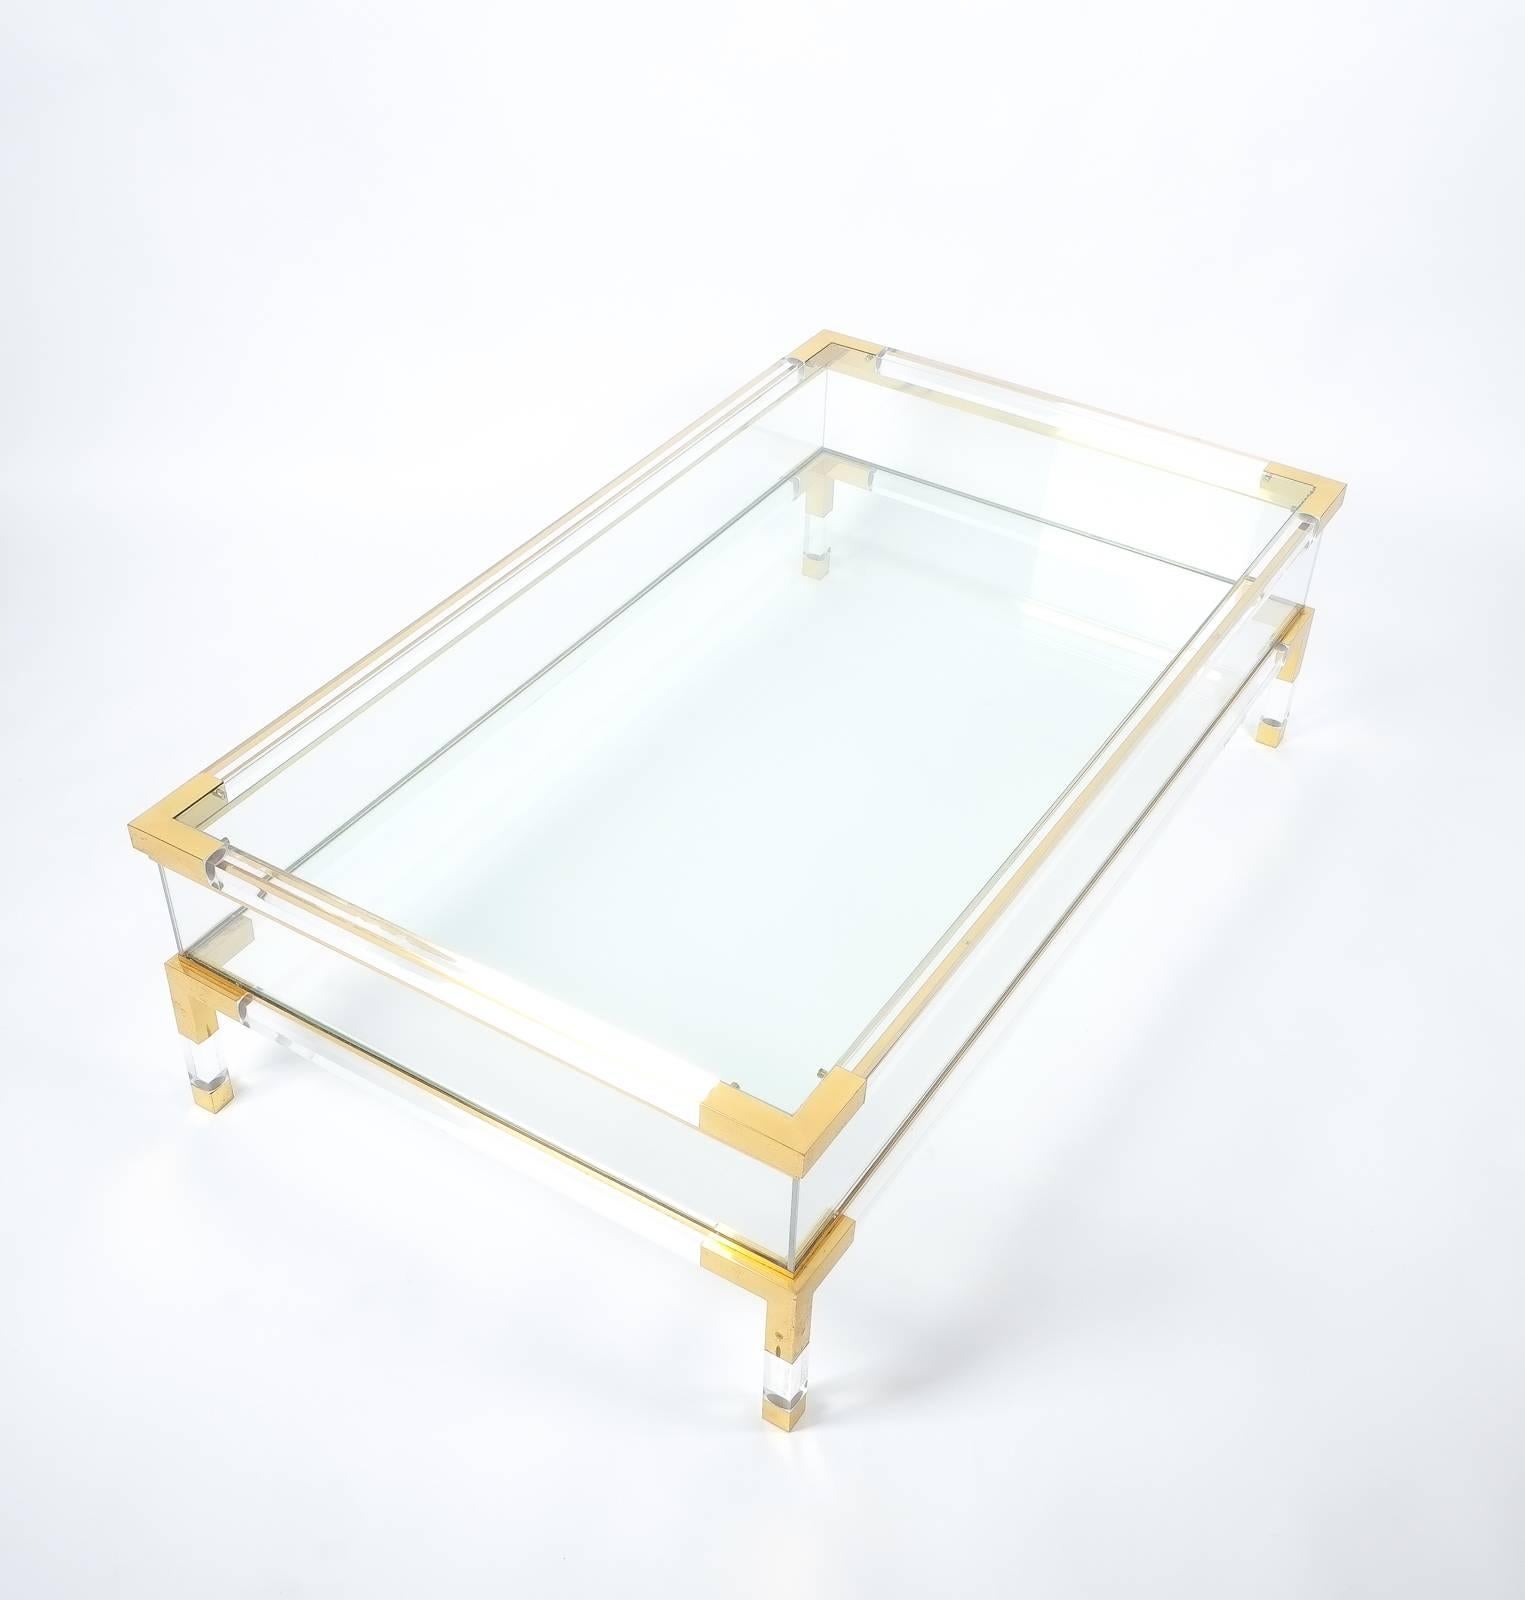 Beautiful coffee table by Maison Jansen, 1970, France, featuring polished Lucite elements with brass joints and glass tops. The top can slide open to reveal an inside compartment for books or decoration. The condition is excellent with a beautifully